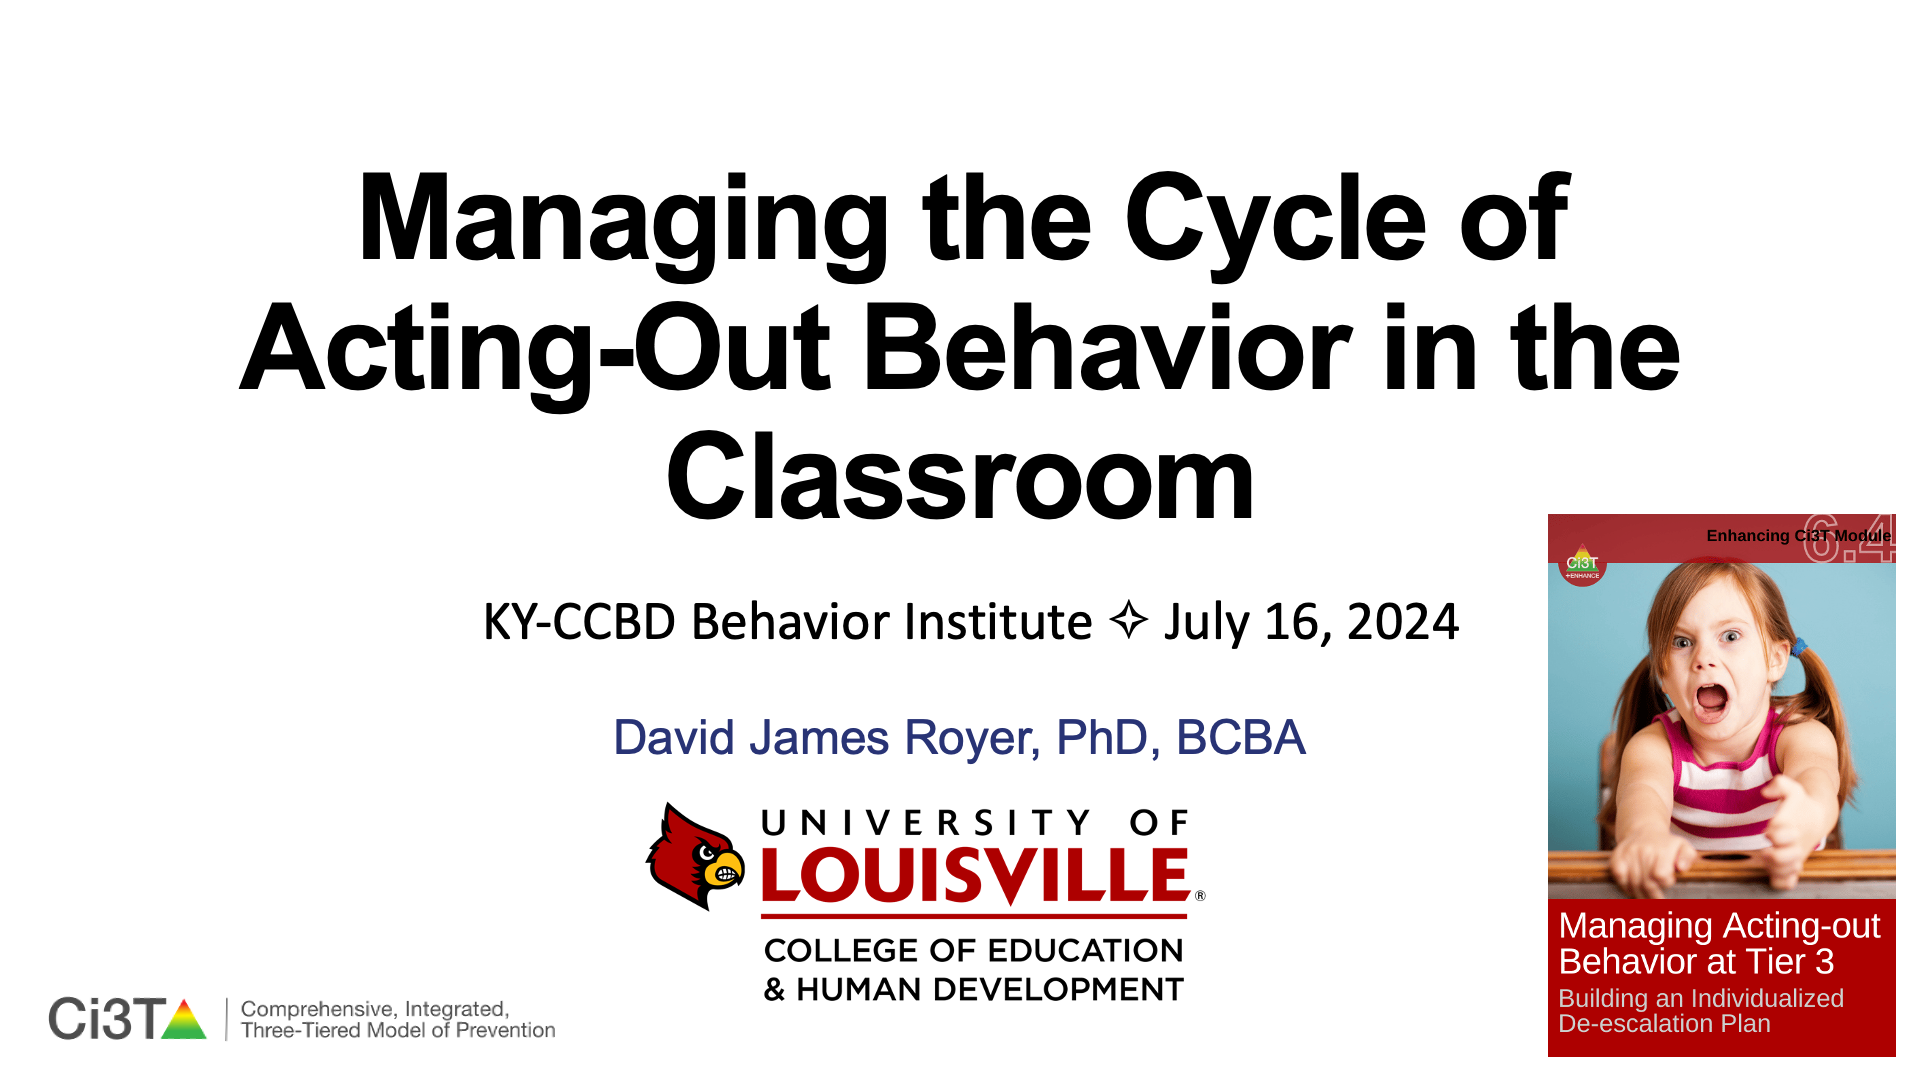 Managing the Cycle of Acting-Out Behavior in the Classroom Presentation at KY-CCBD